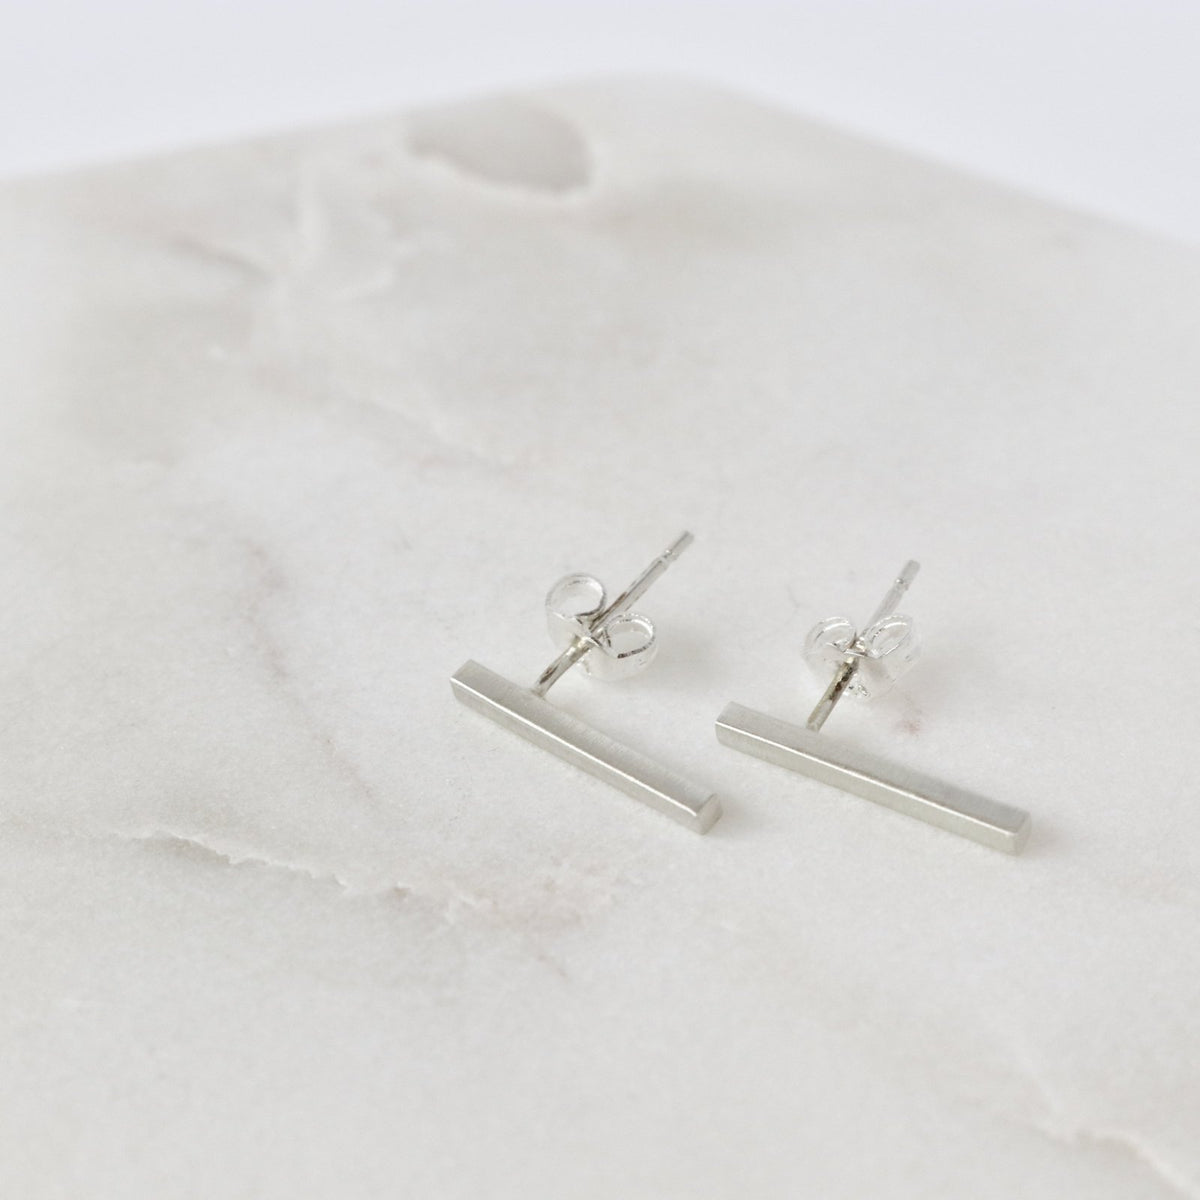 Bar Earrings - Midi Length, Sterling Silver - Peterson MADE